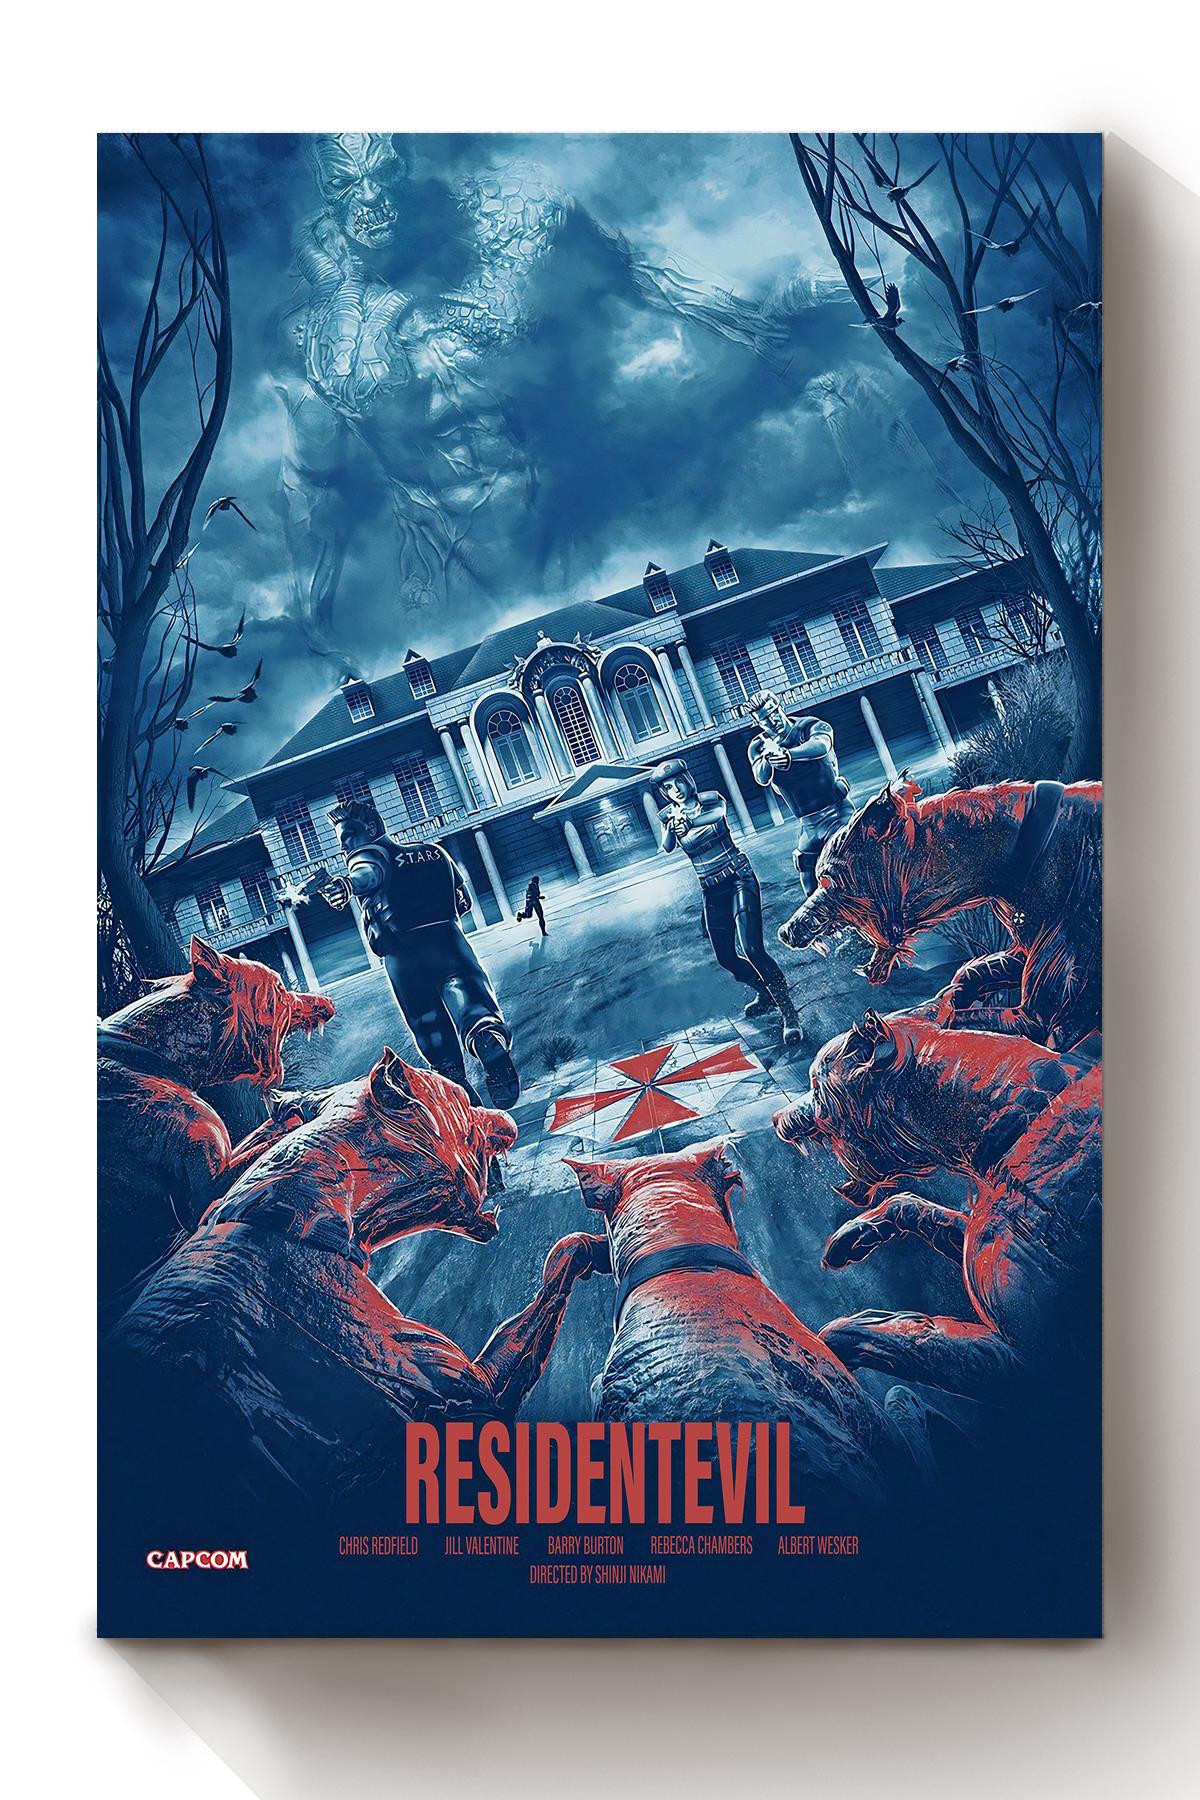 Resident Evil Legend Video Game Game Gift For Gamer, Role Playing Game Fan Canvas Framed Prints, Canvas Paintings Wrapped Canvas 8x10